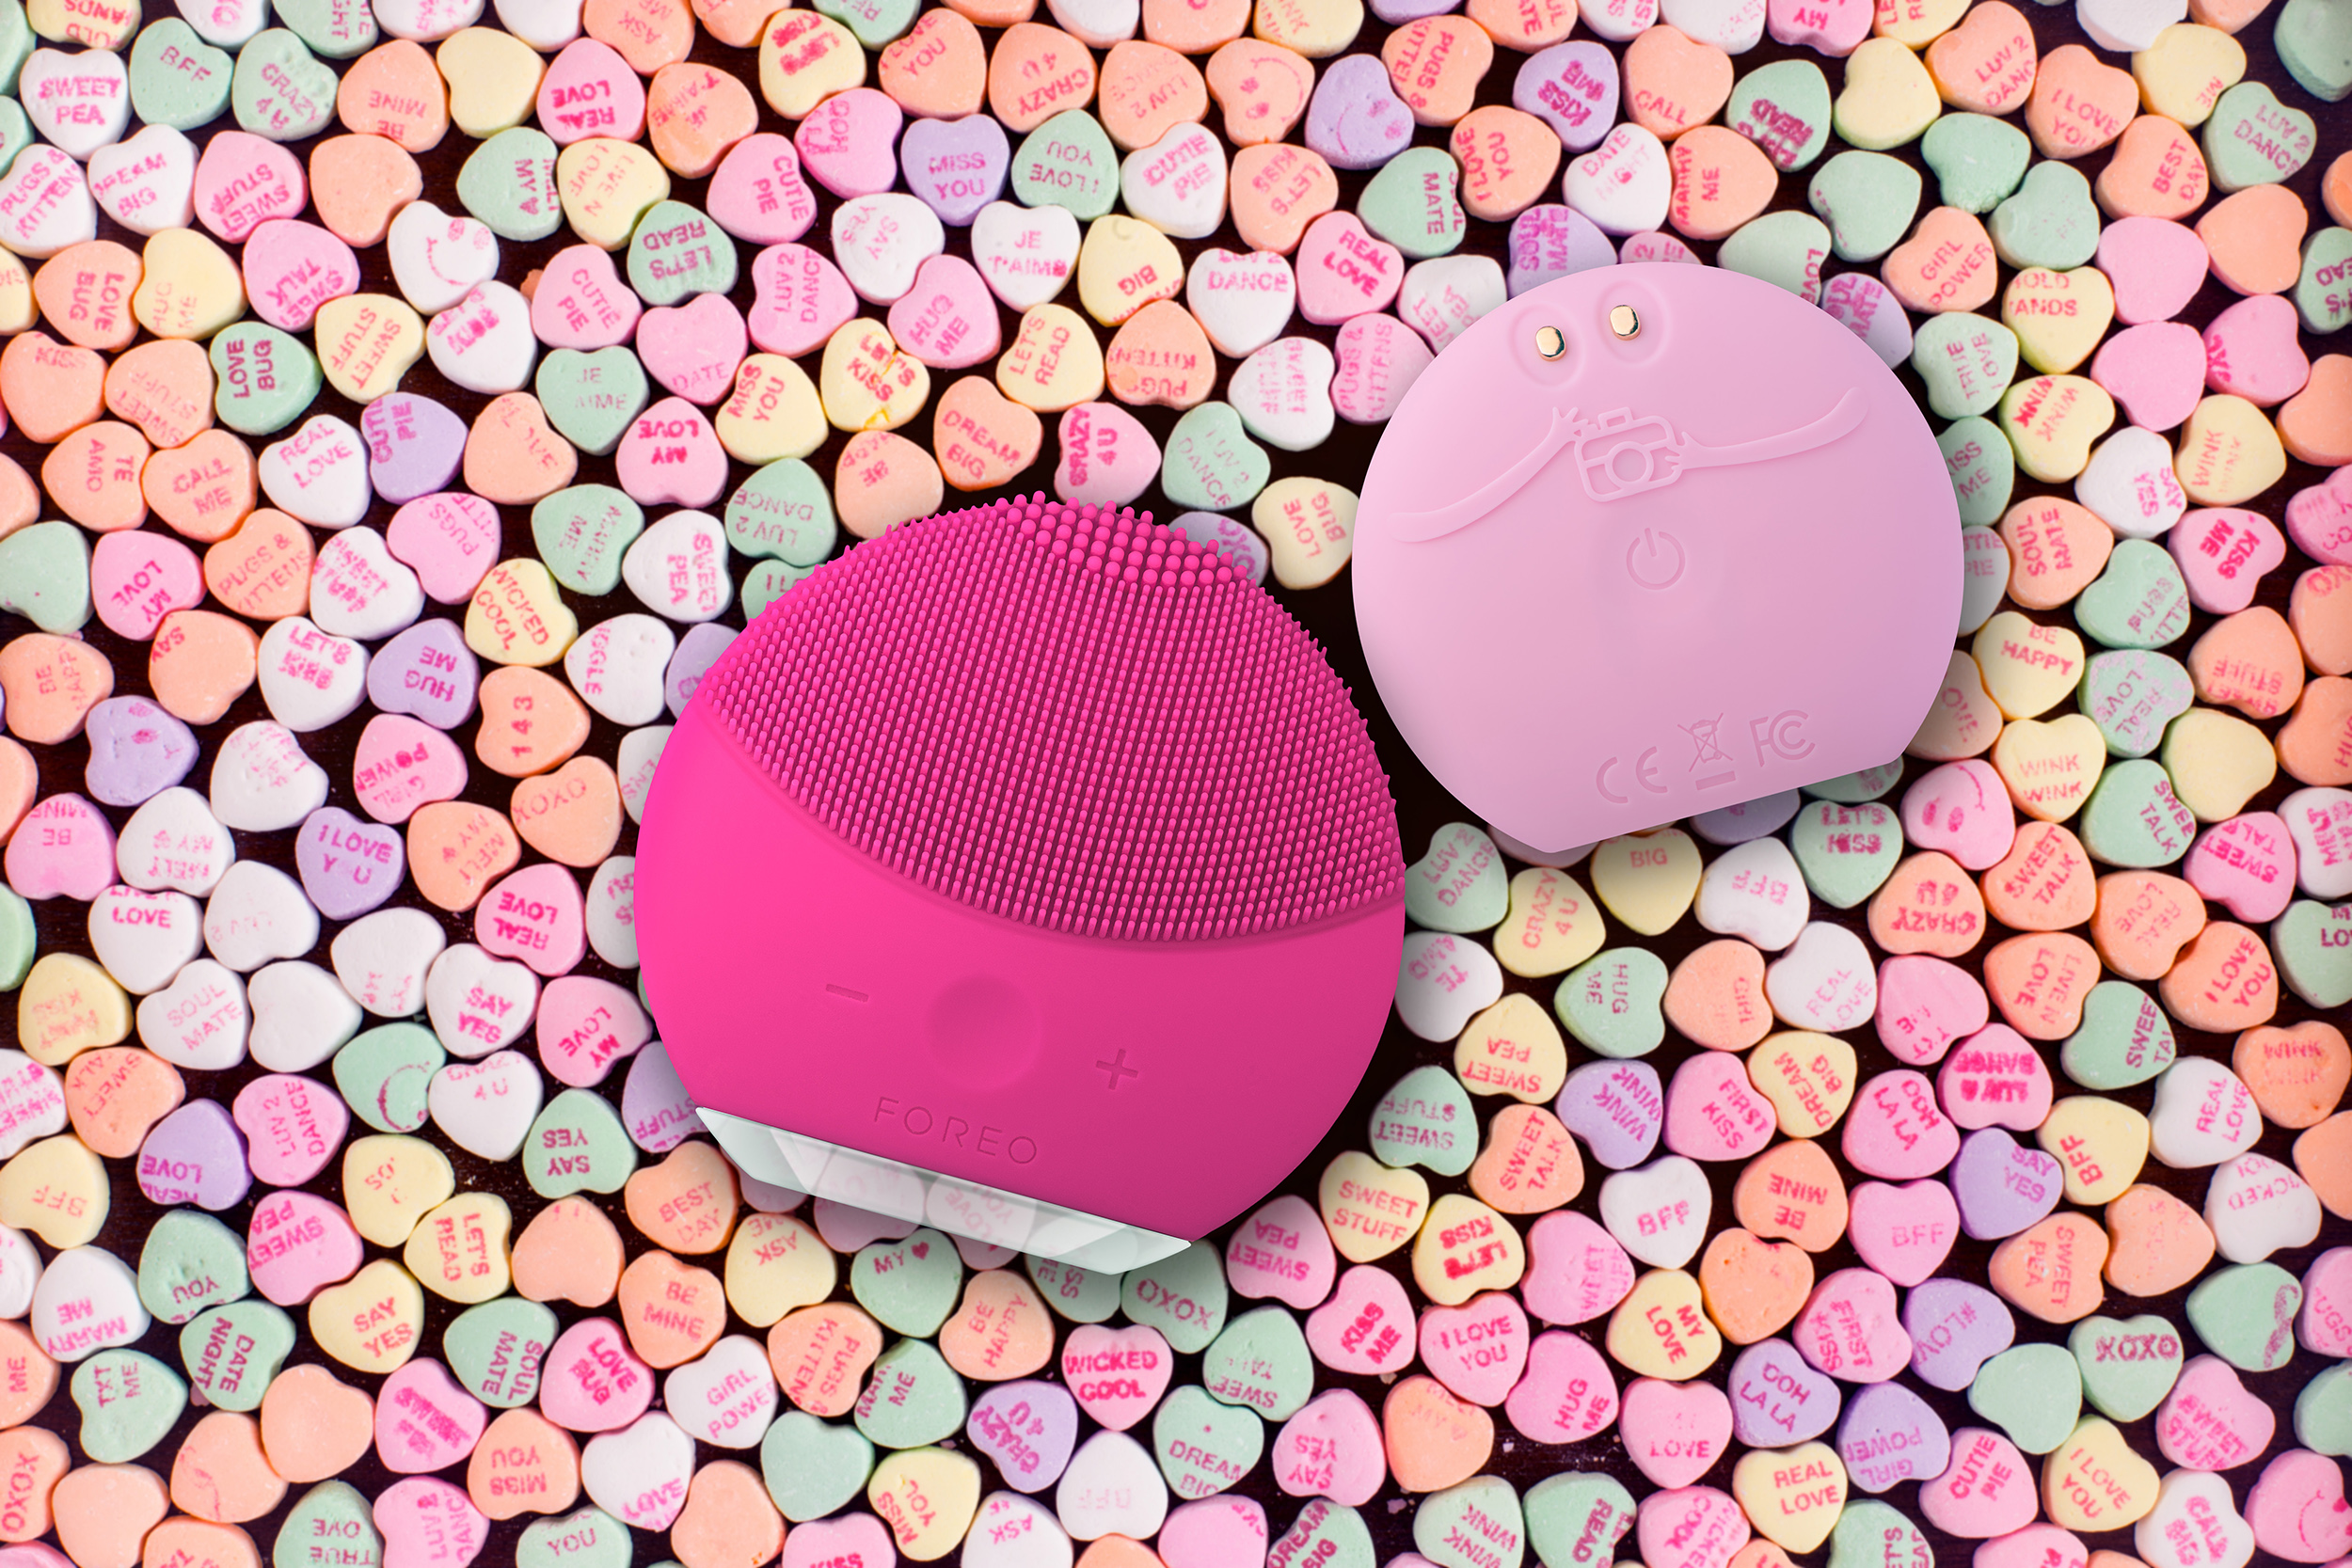 01_foreo_valentine_s_day_lead_image.jpg